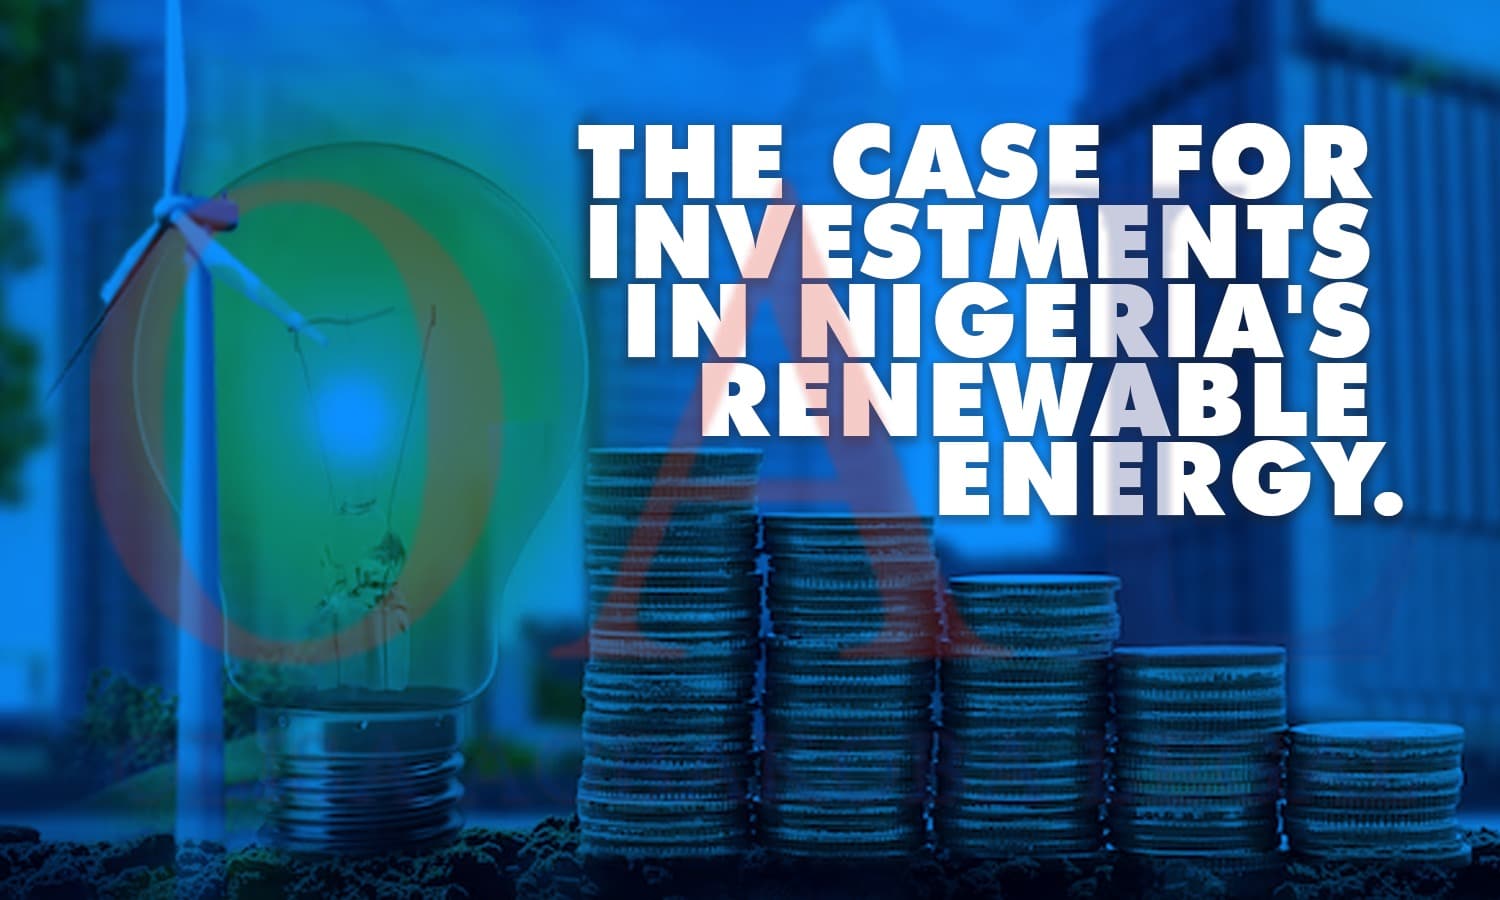 The Case For Investments In Nigeria's Renewable Energy by Olisa Agbakoba Legal (OAL).